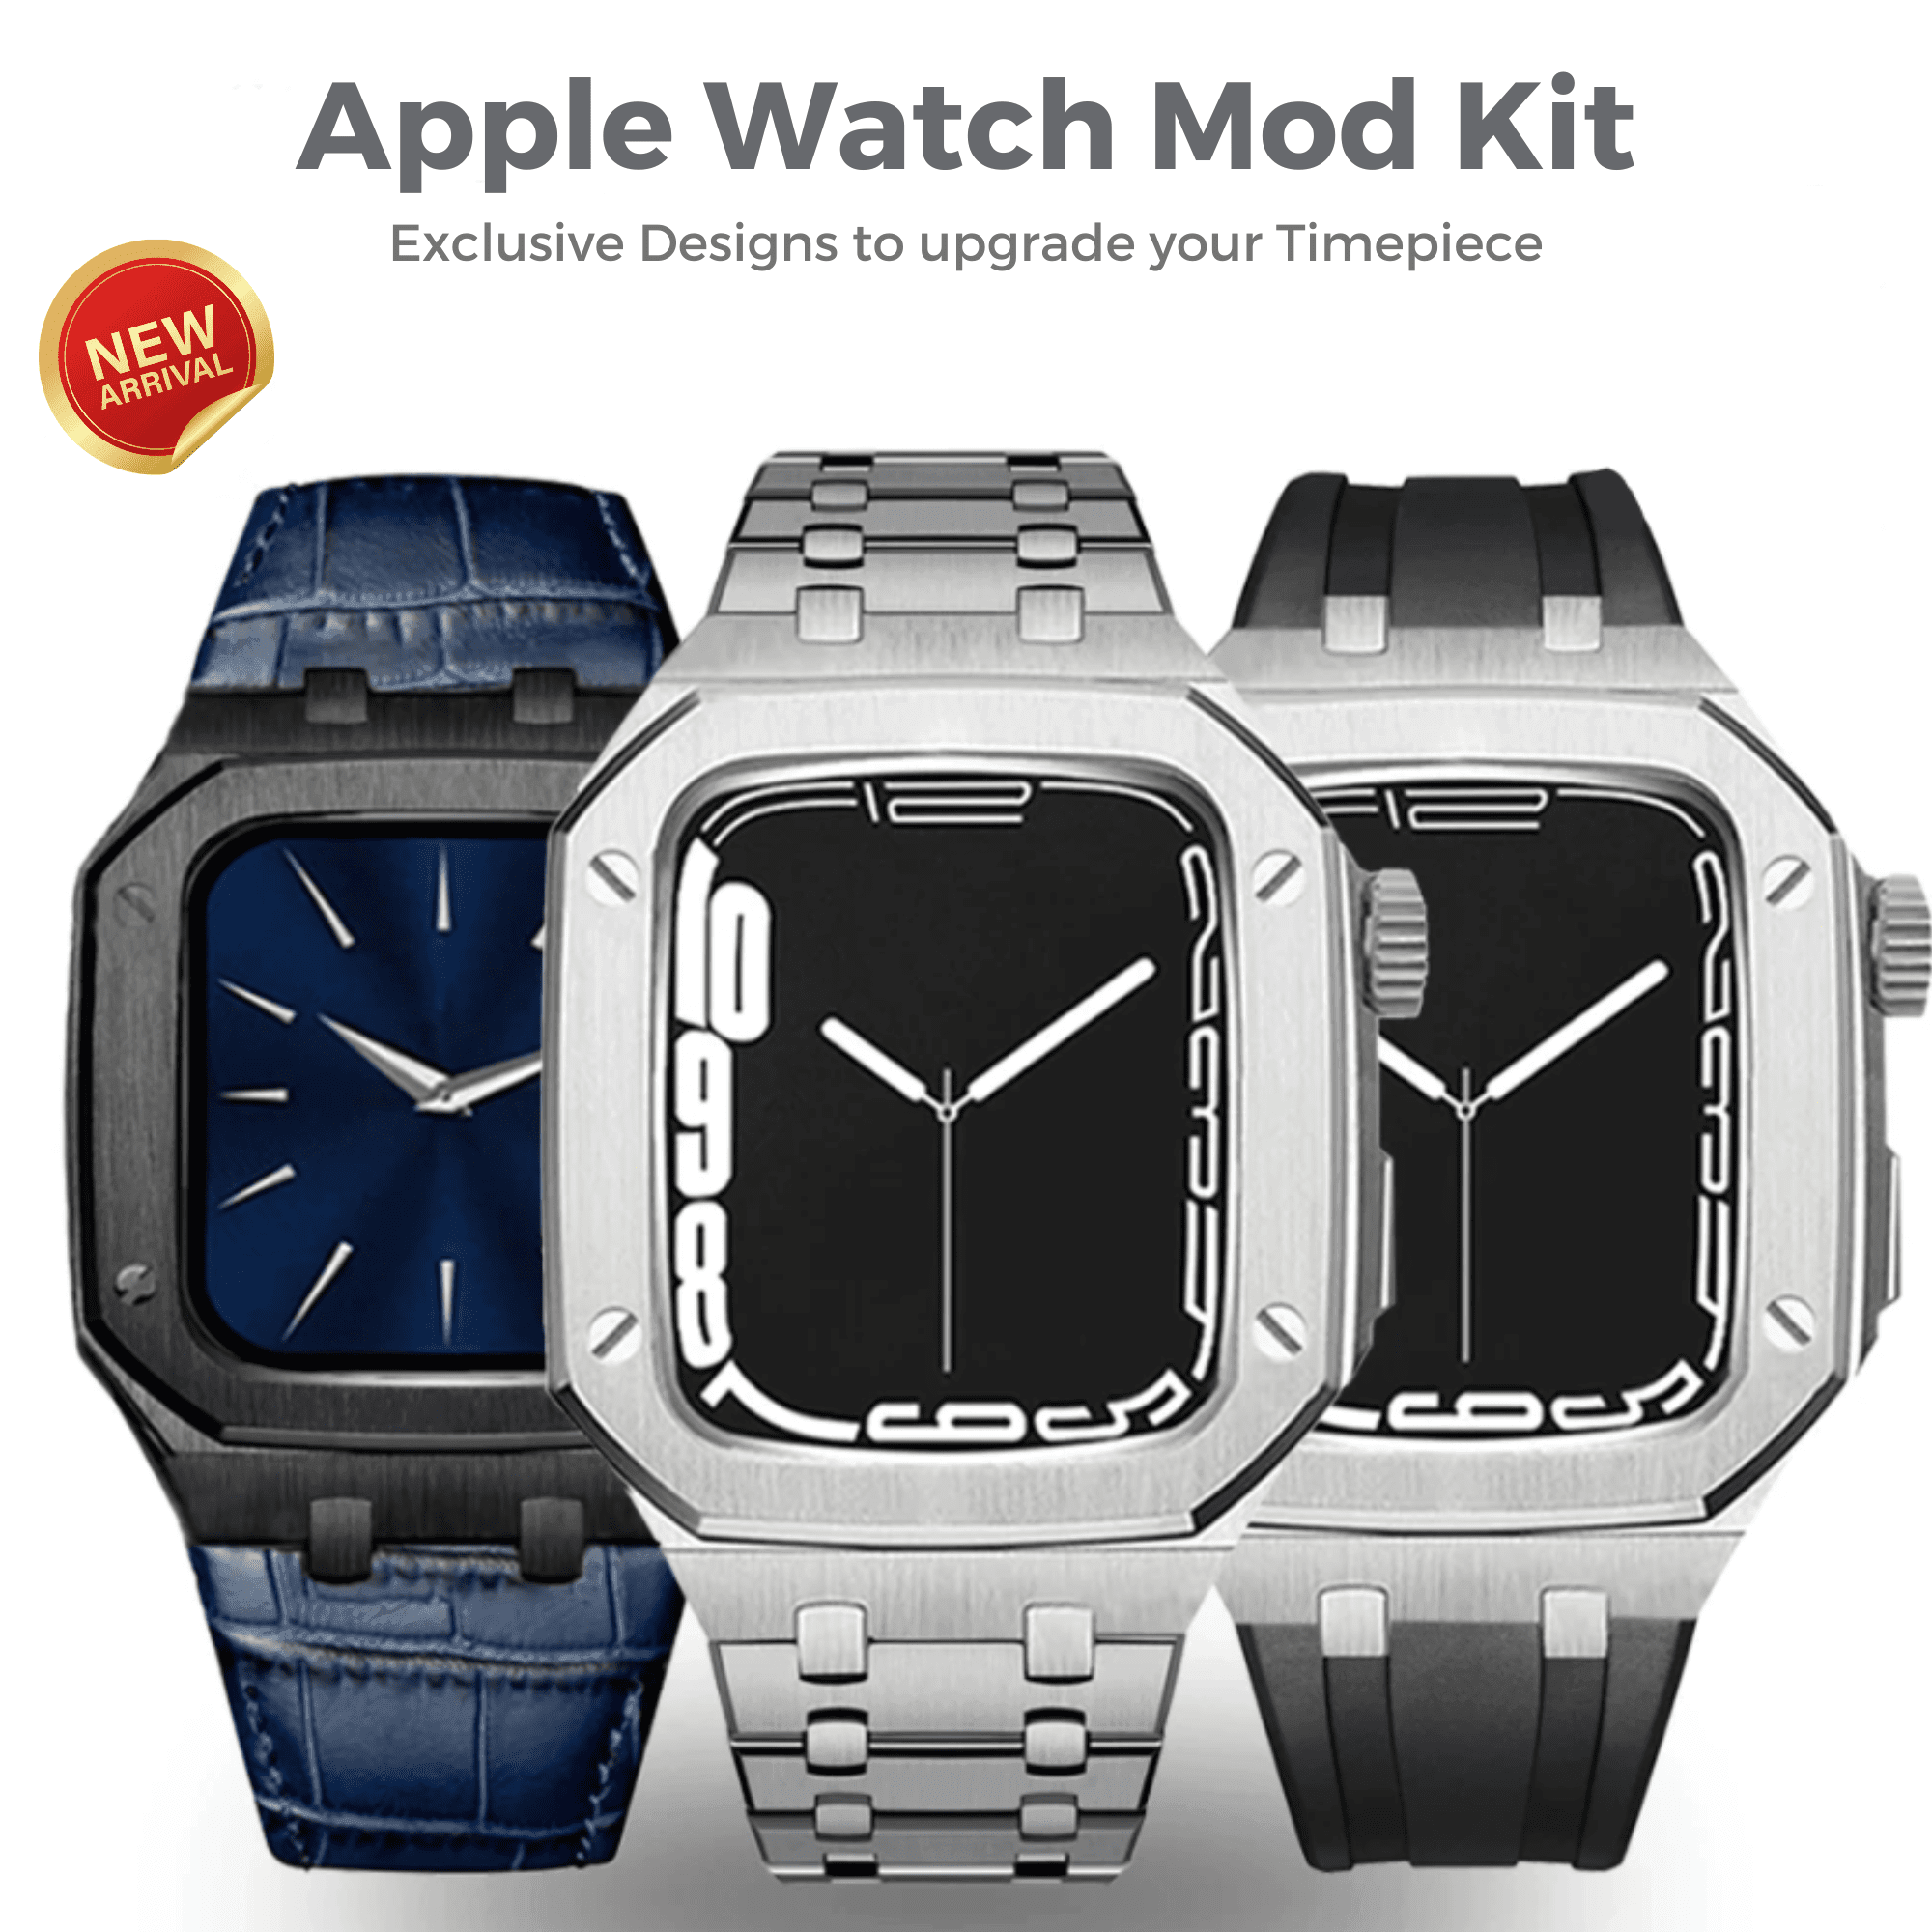 Luxury Metal Mod Kit for Apple Watch | Leather & Stainless Steel Straps | Apple Watch SE/3/4/5/6 accessory 44 mm| Silver Case - Blue Leather Band mod kits india dream watches apple watch